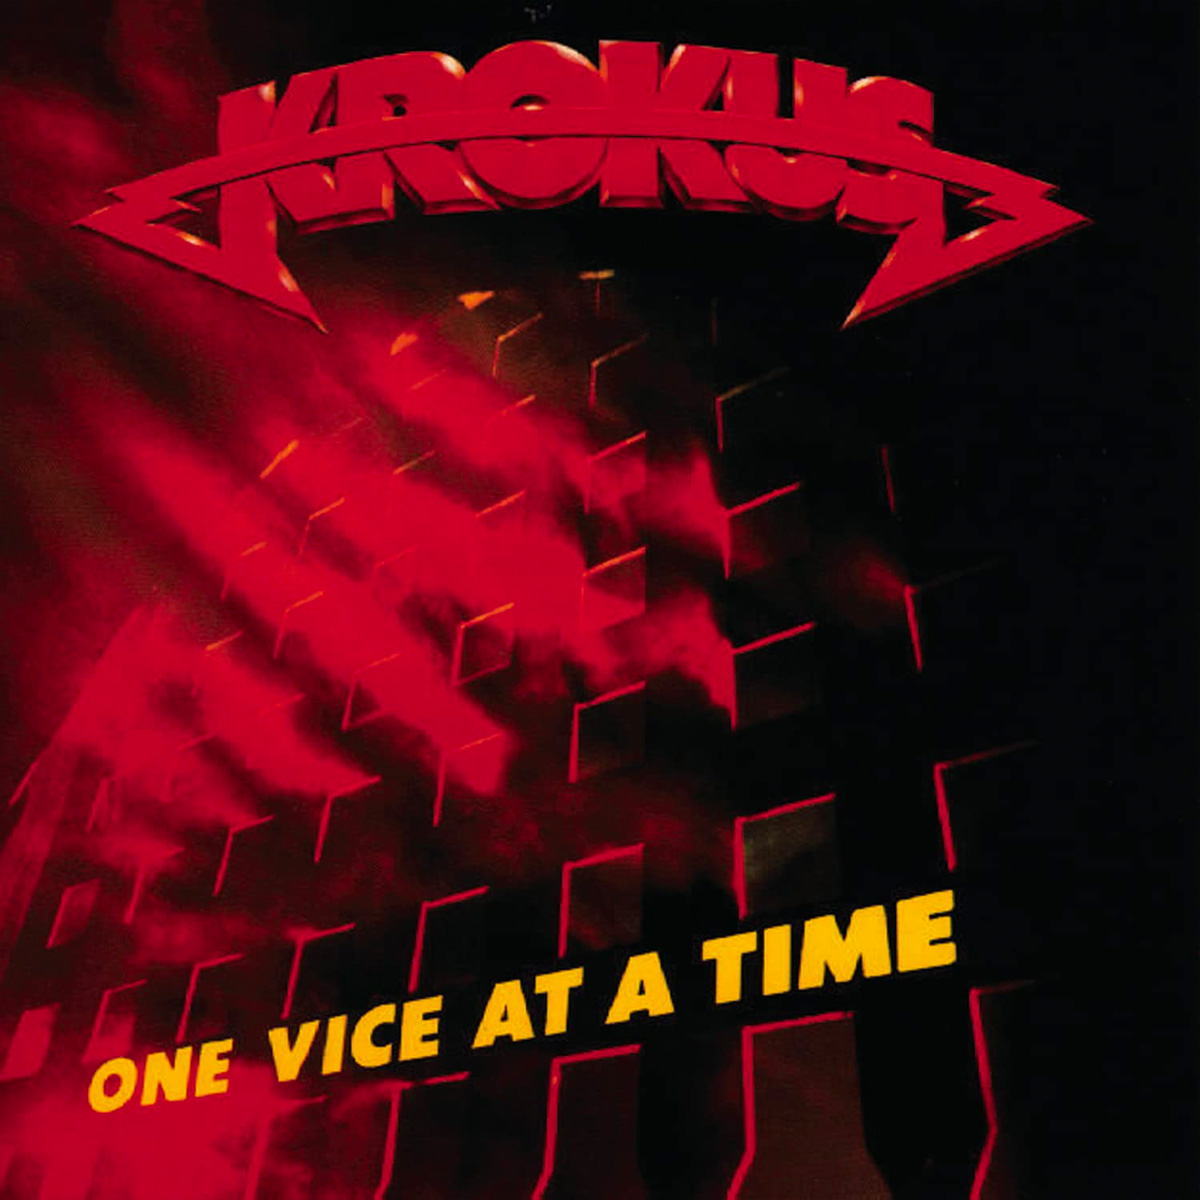 One Vice at a Time cd cover